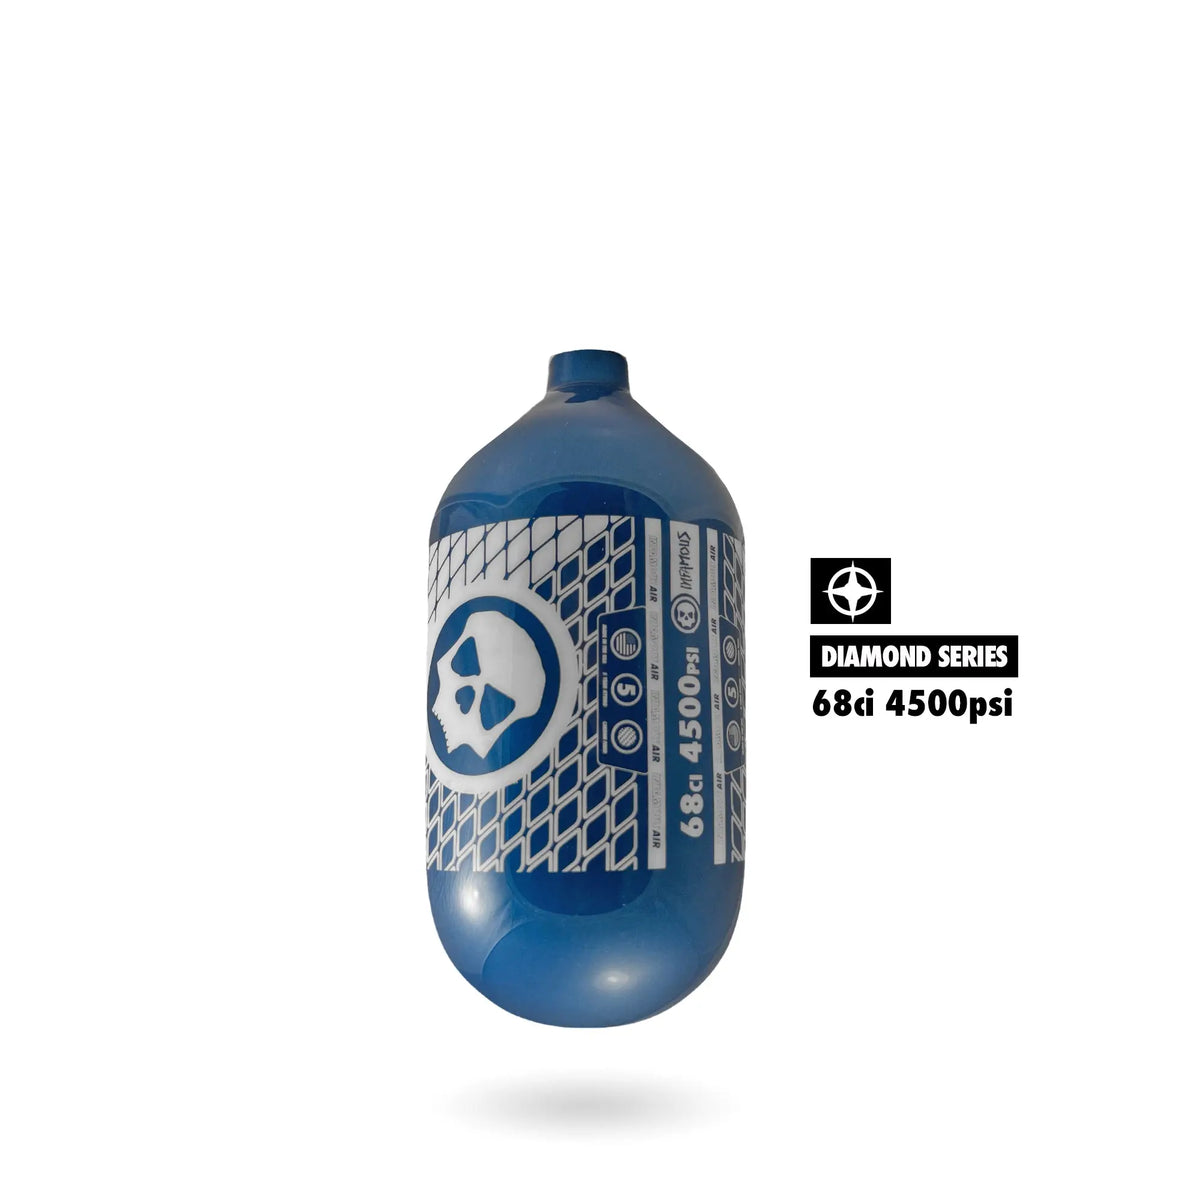 &quot;DIAMOND SERIES&quot; AIR PATTERN AIR TANK - 68ci / 4500psi (BOTTLE ONLY) Infamous Paintball